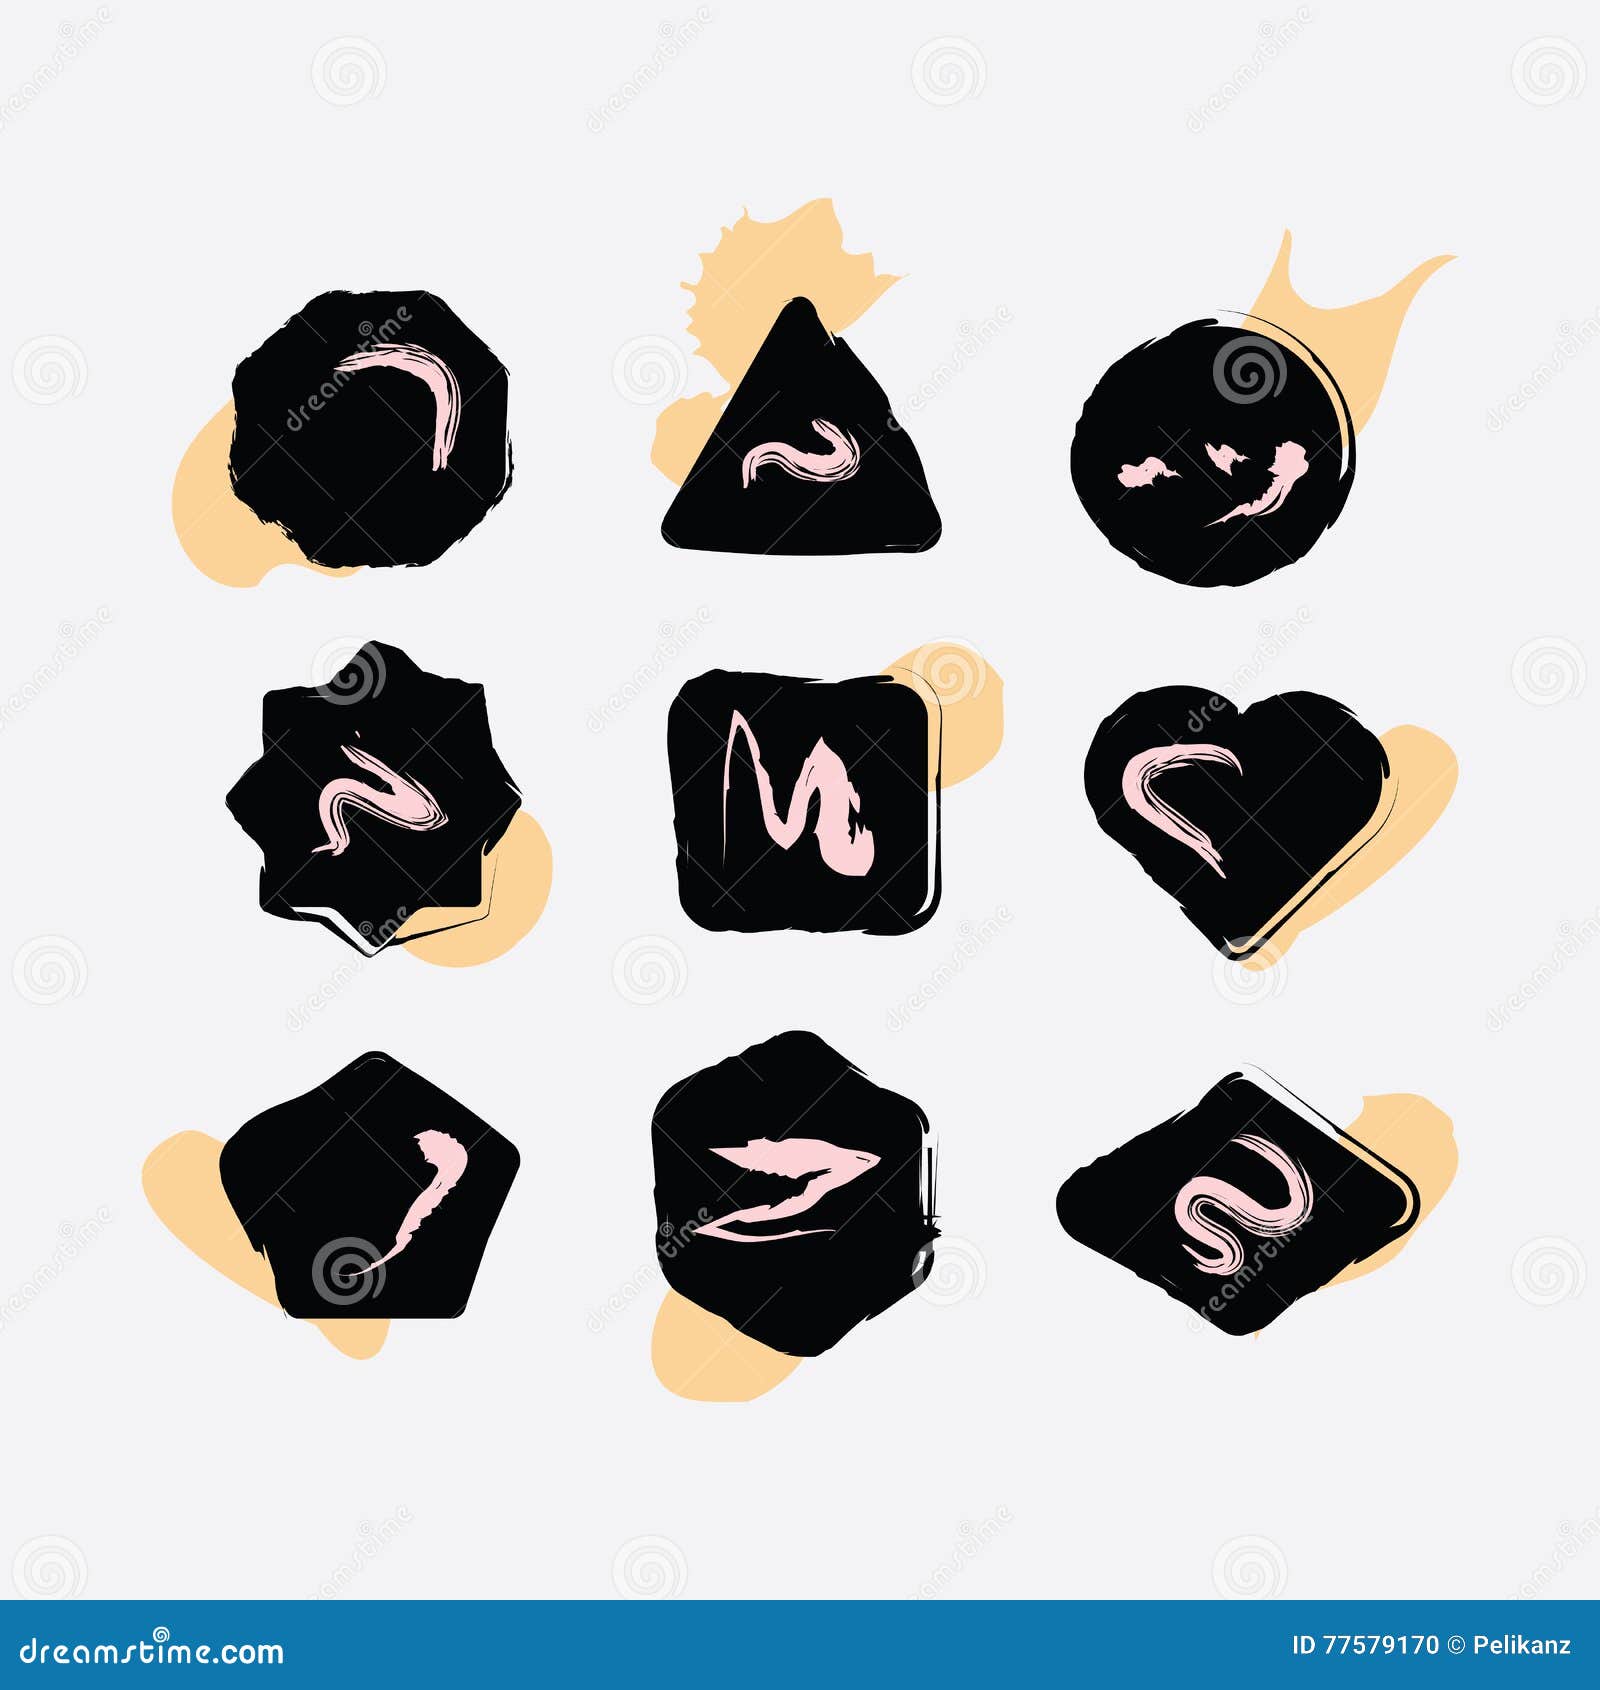 abstract black inky hand drawn s icons set